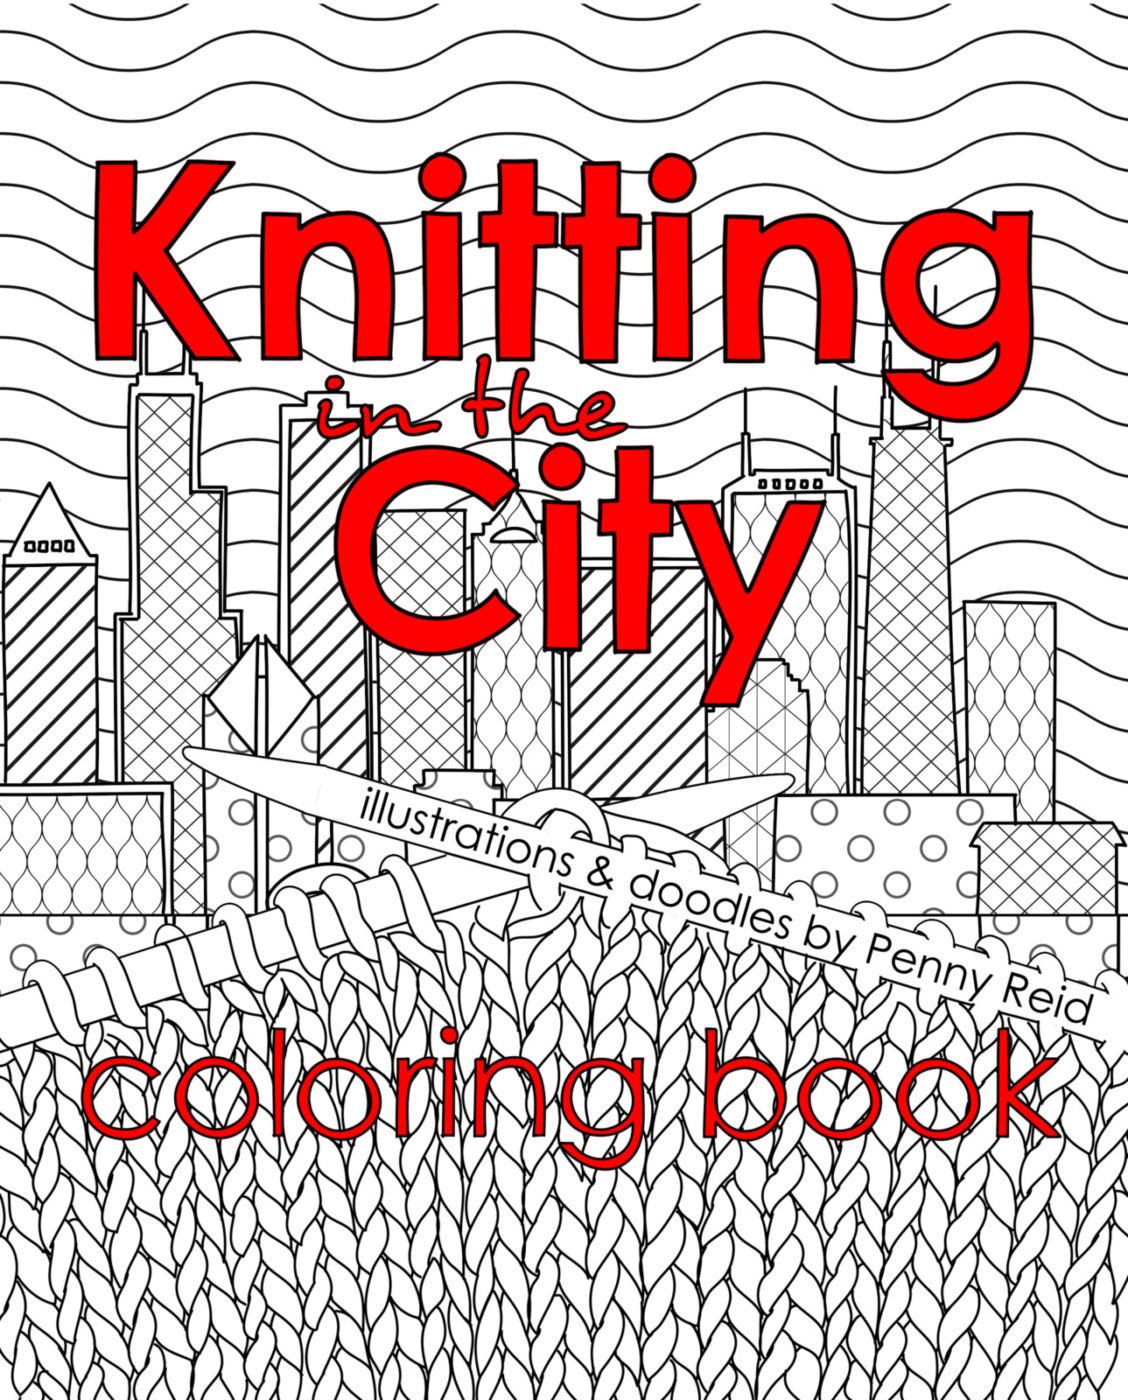 Knitting in the City Series Penny Reid